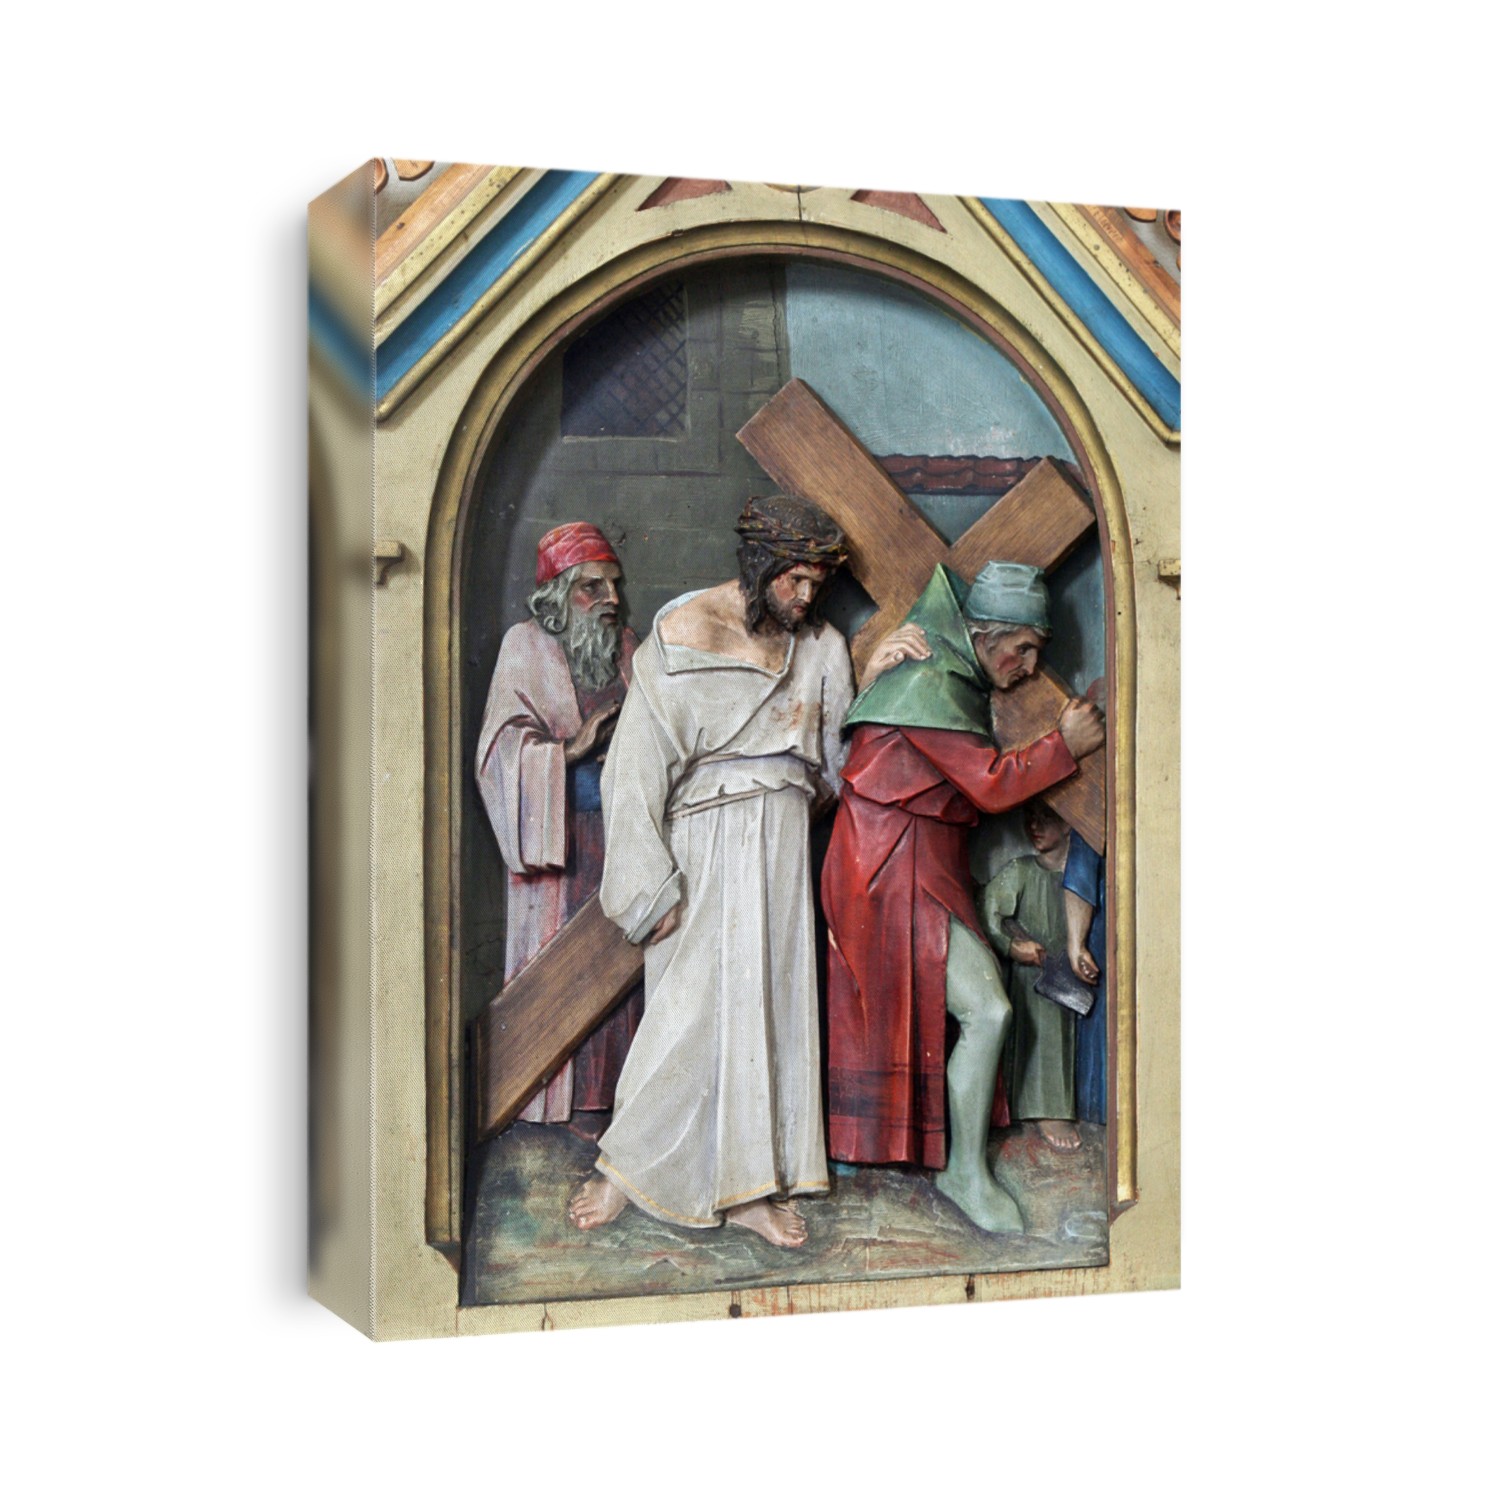 5th Stations of the Cross, Simon of Cyrene carries the cross